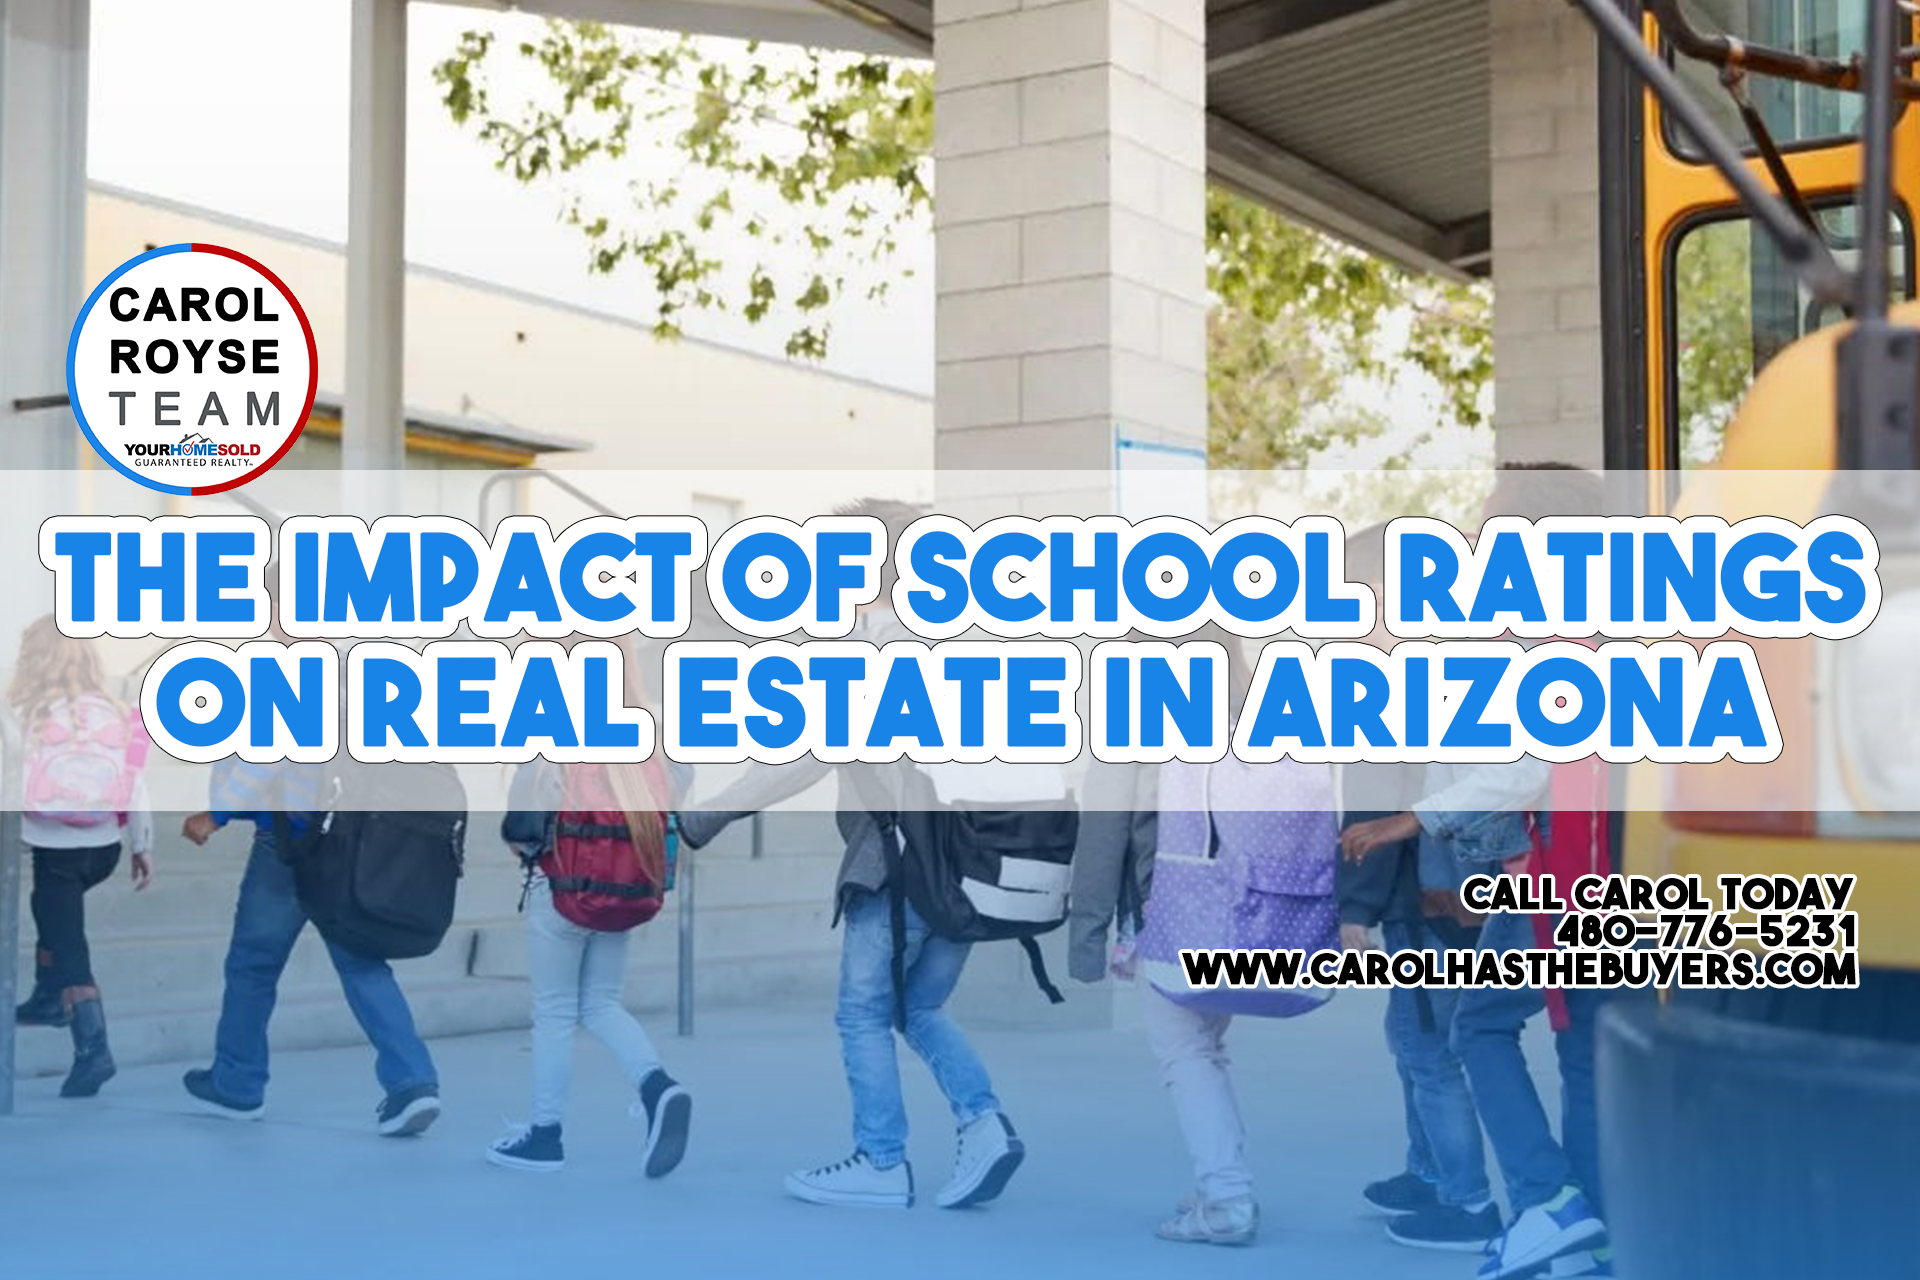 The Impact of School Ratings on Real Estate in Arizona